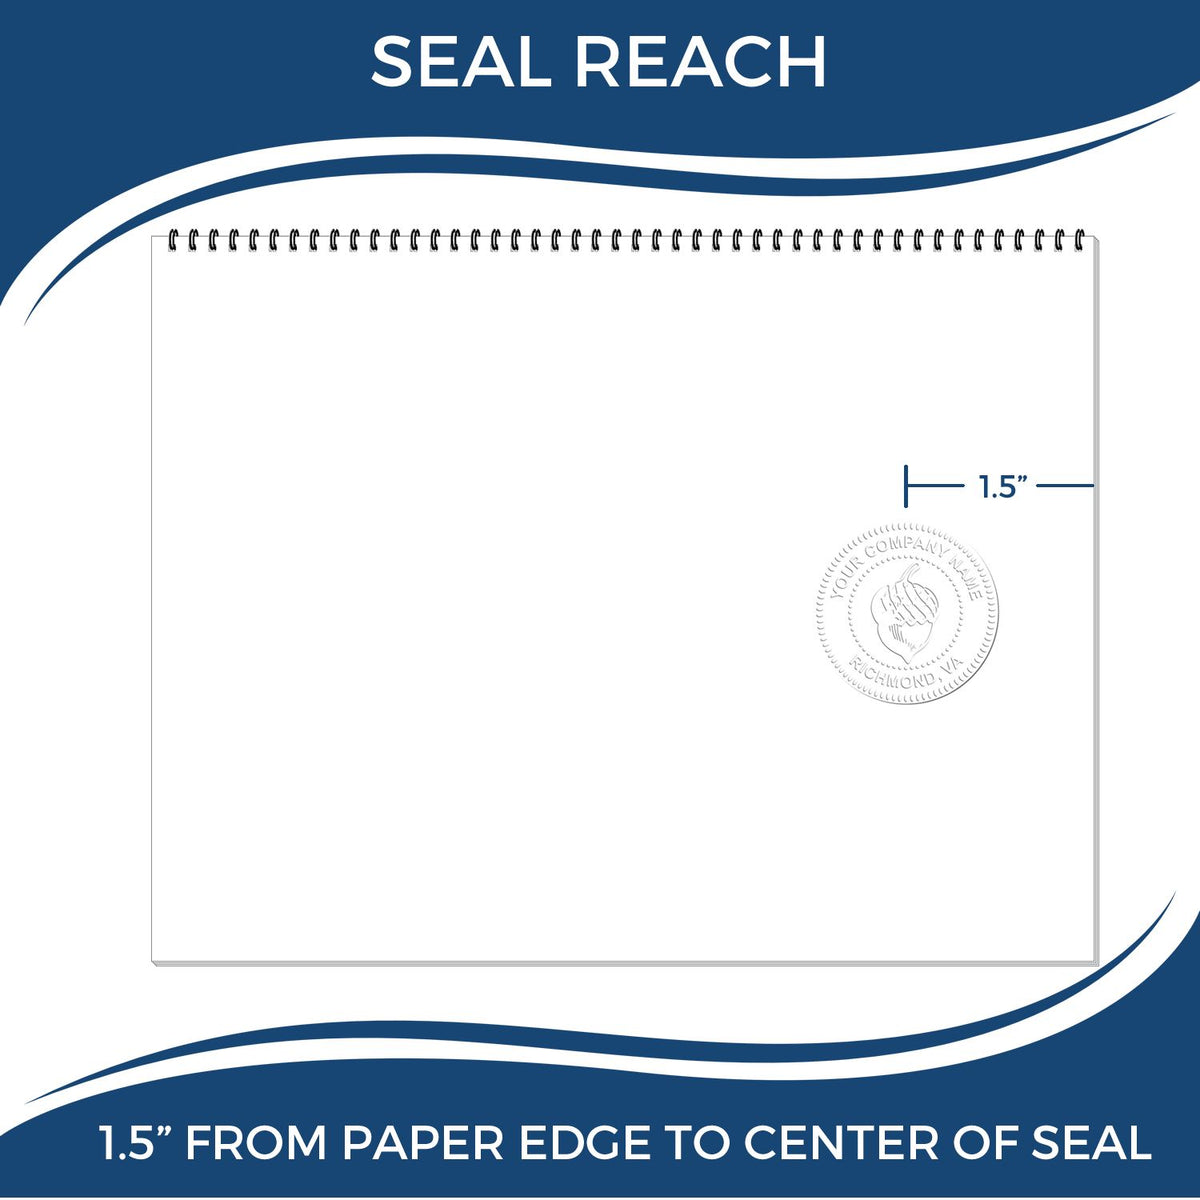 An infographic showing the seal reach which is represented by a ruler and a miniature seal image of the Handheld New Hampshire Professional Geologist Embosser